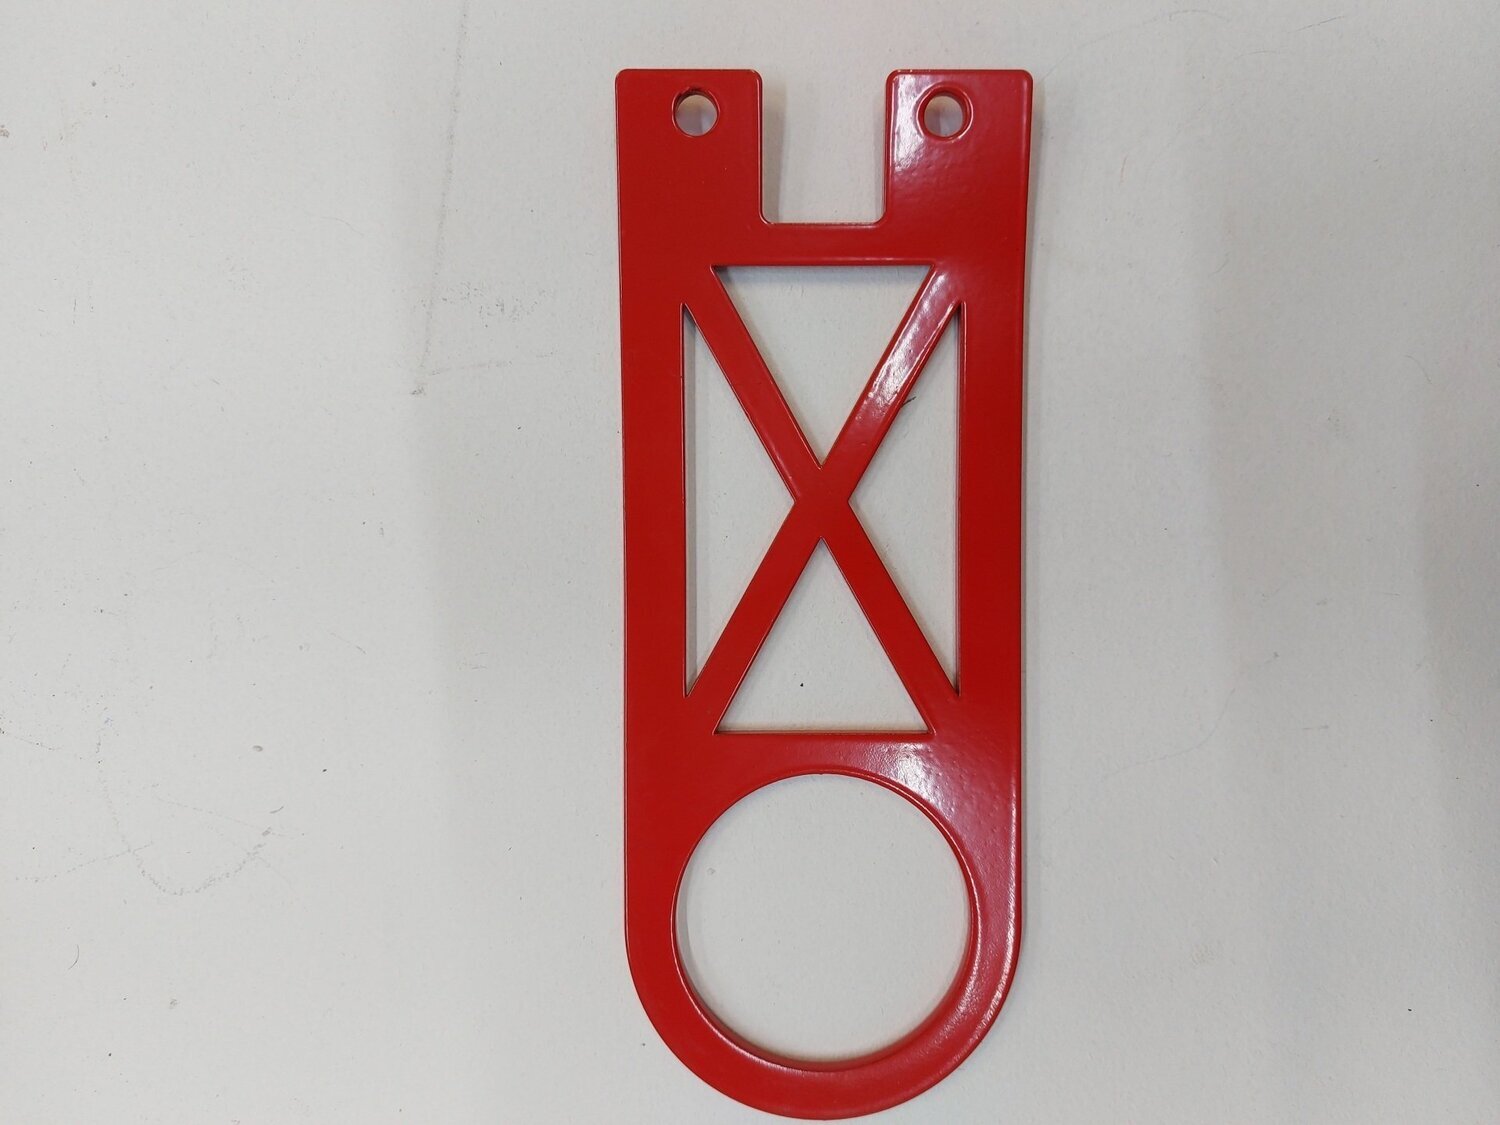 Lotus exige v6 front tow bracket RED